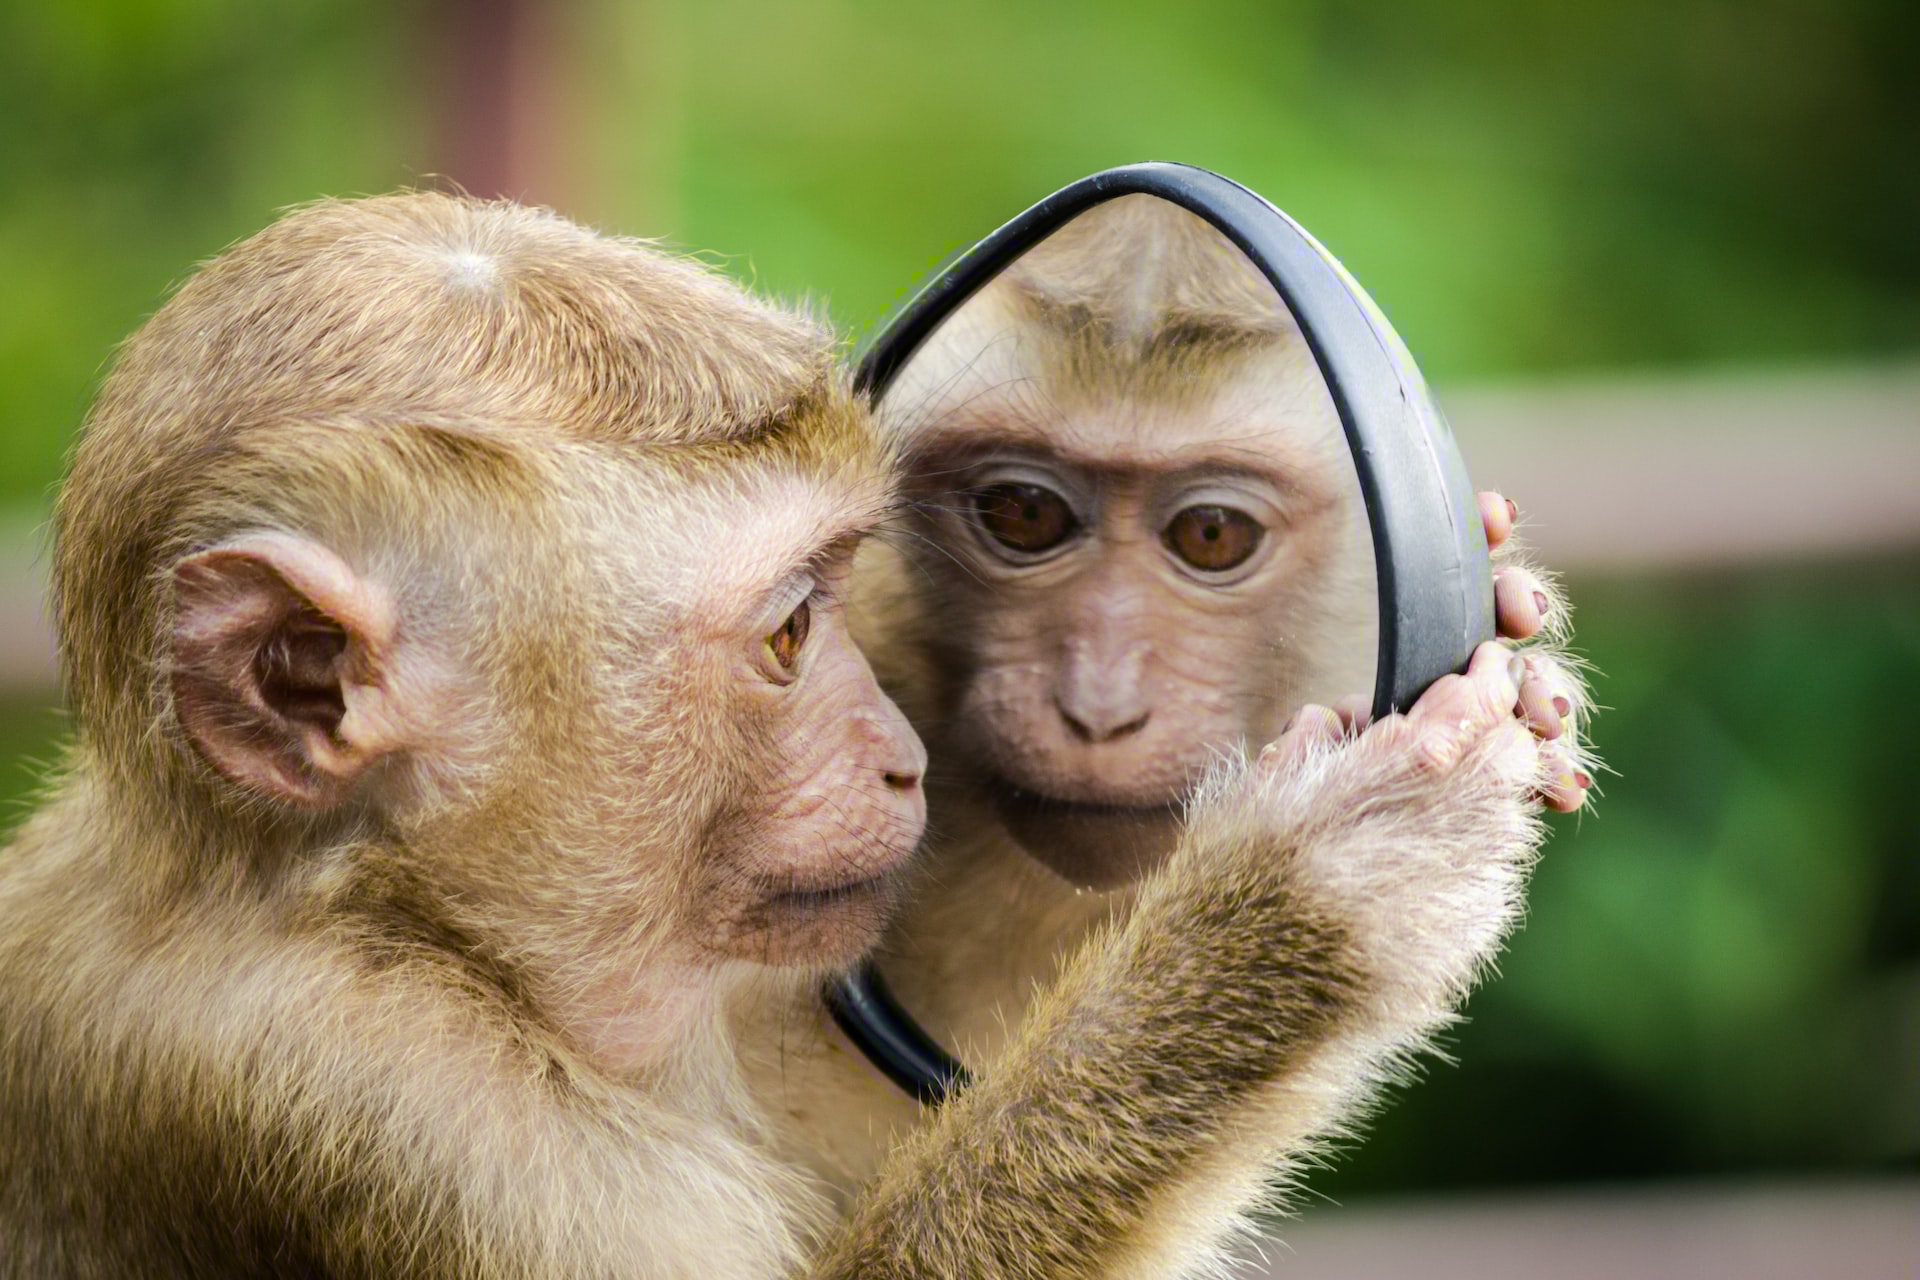 cute monkey holding a small mirror looking closely to his own reflection